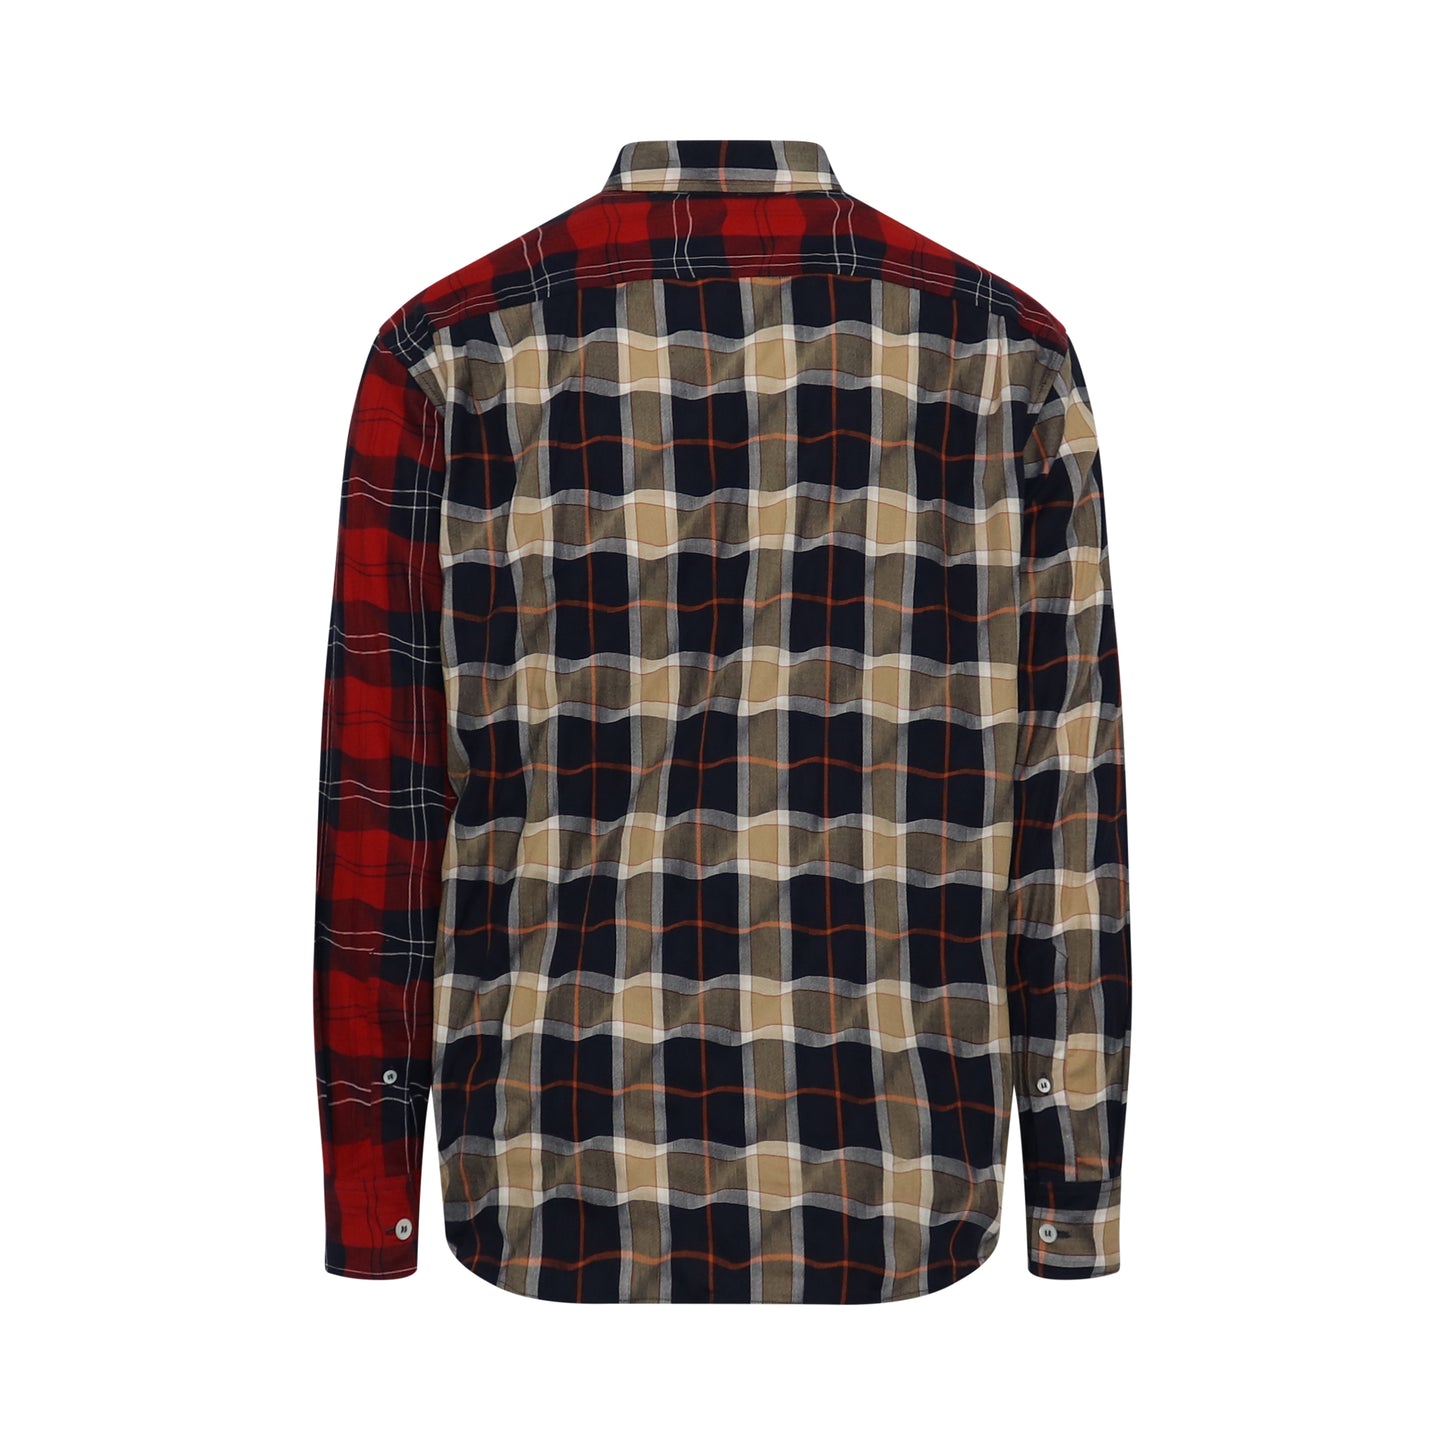 Patchwork Check Shirt in Multicolorcolor